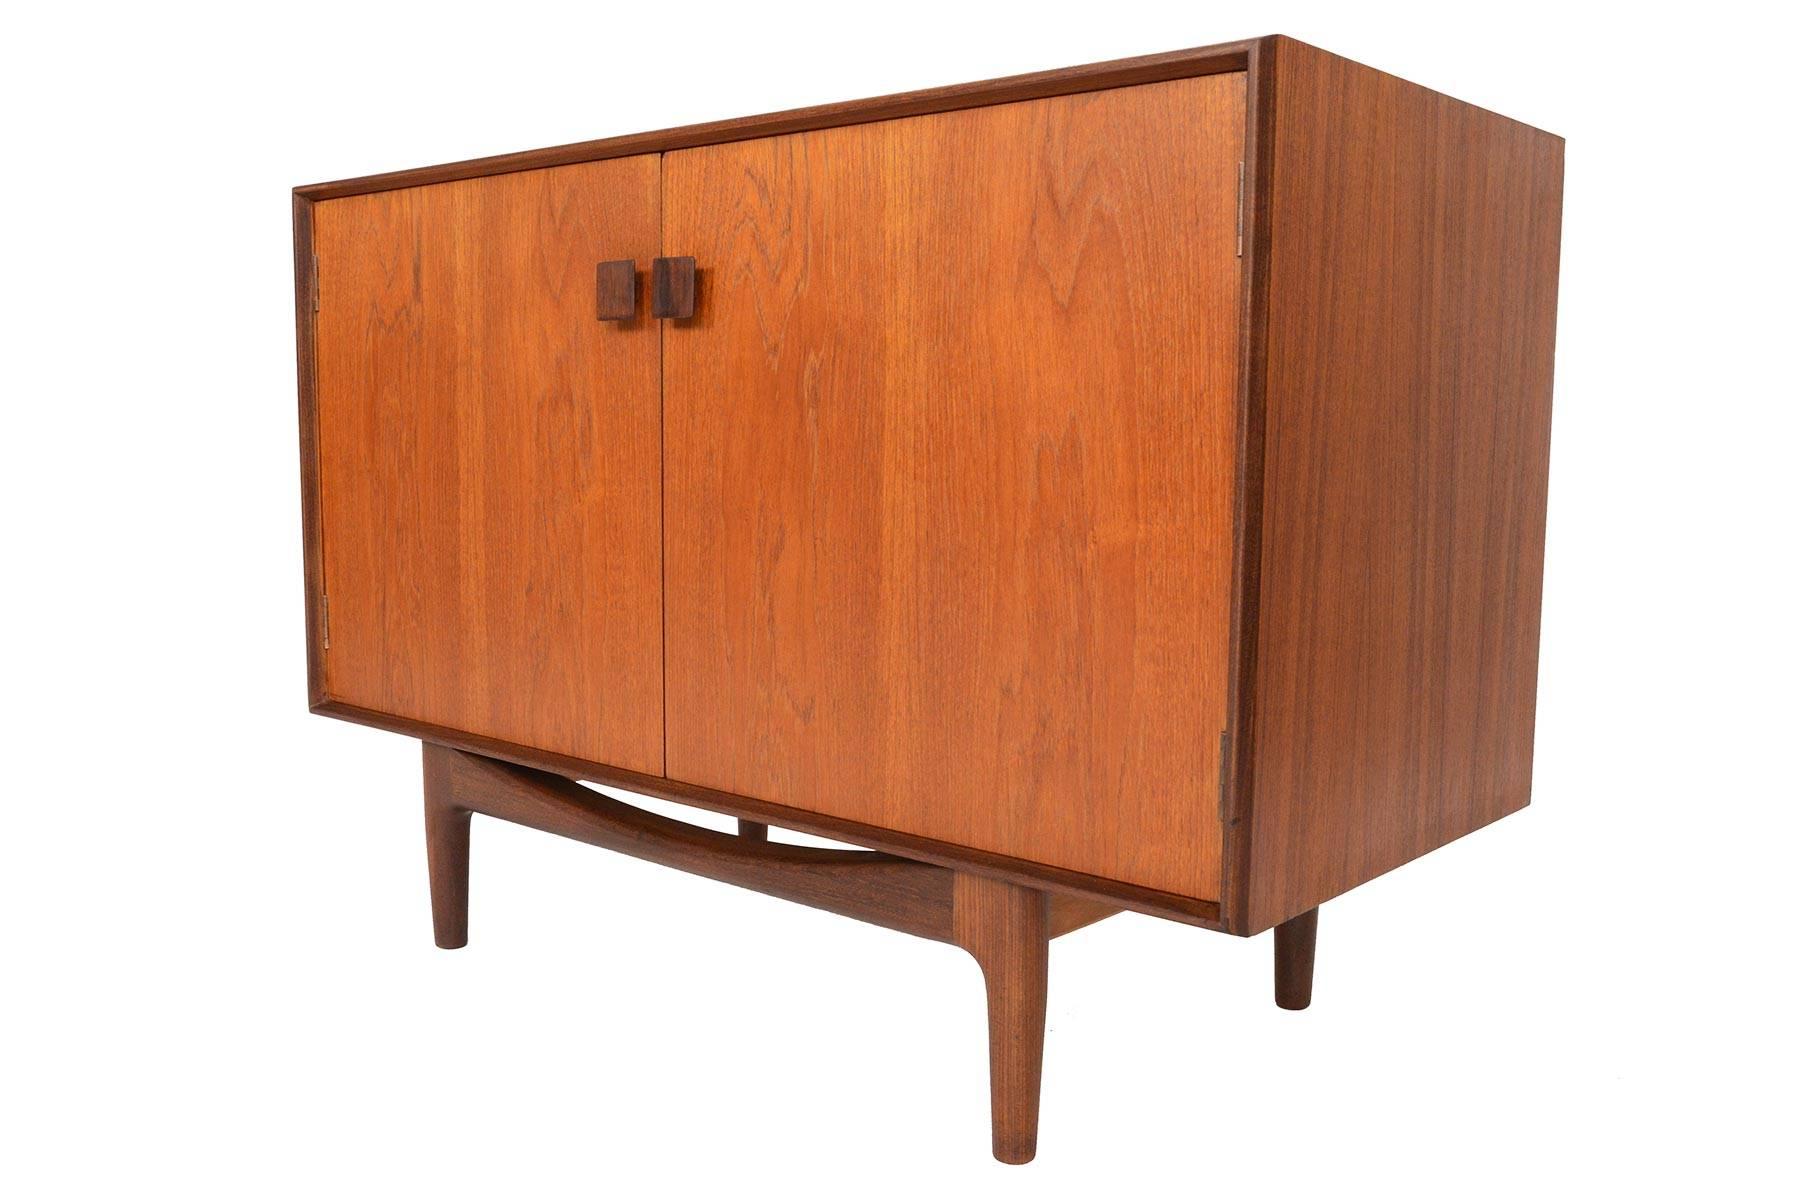 Small Refinished Teak Credenza by Ib Kofod-Larsen for G-Plan #4 1